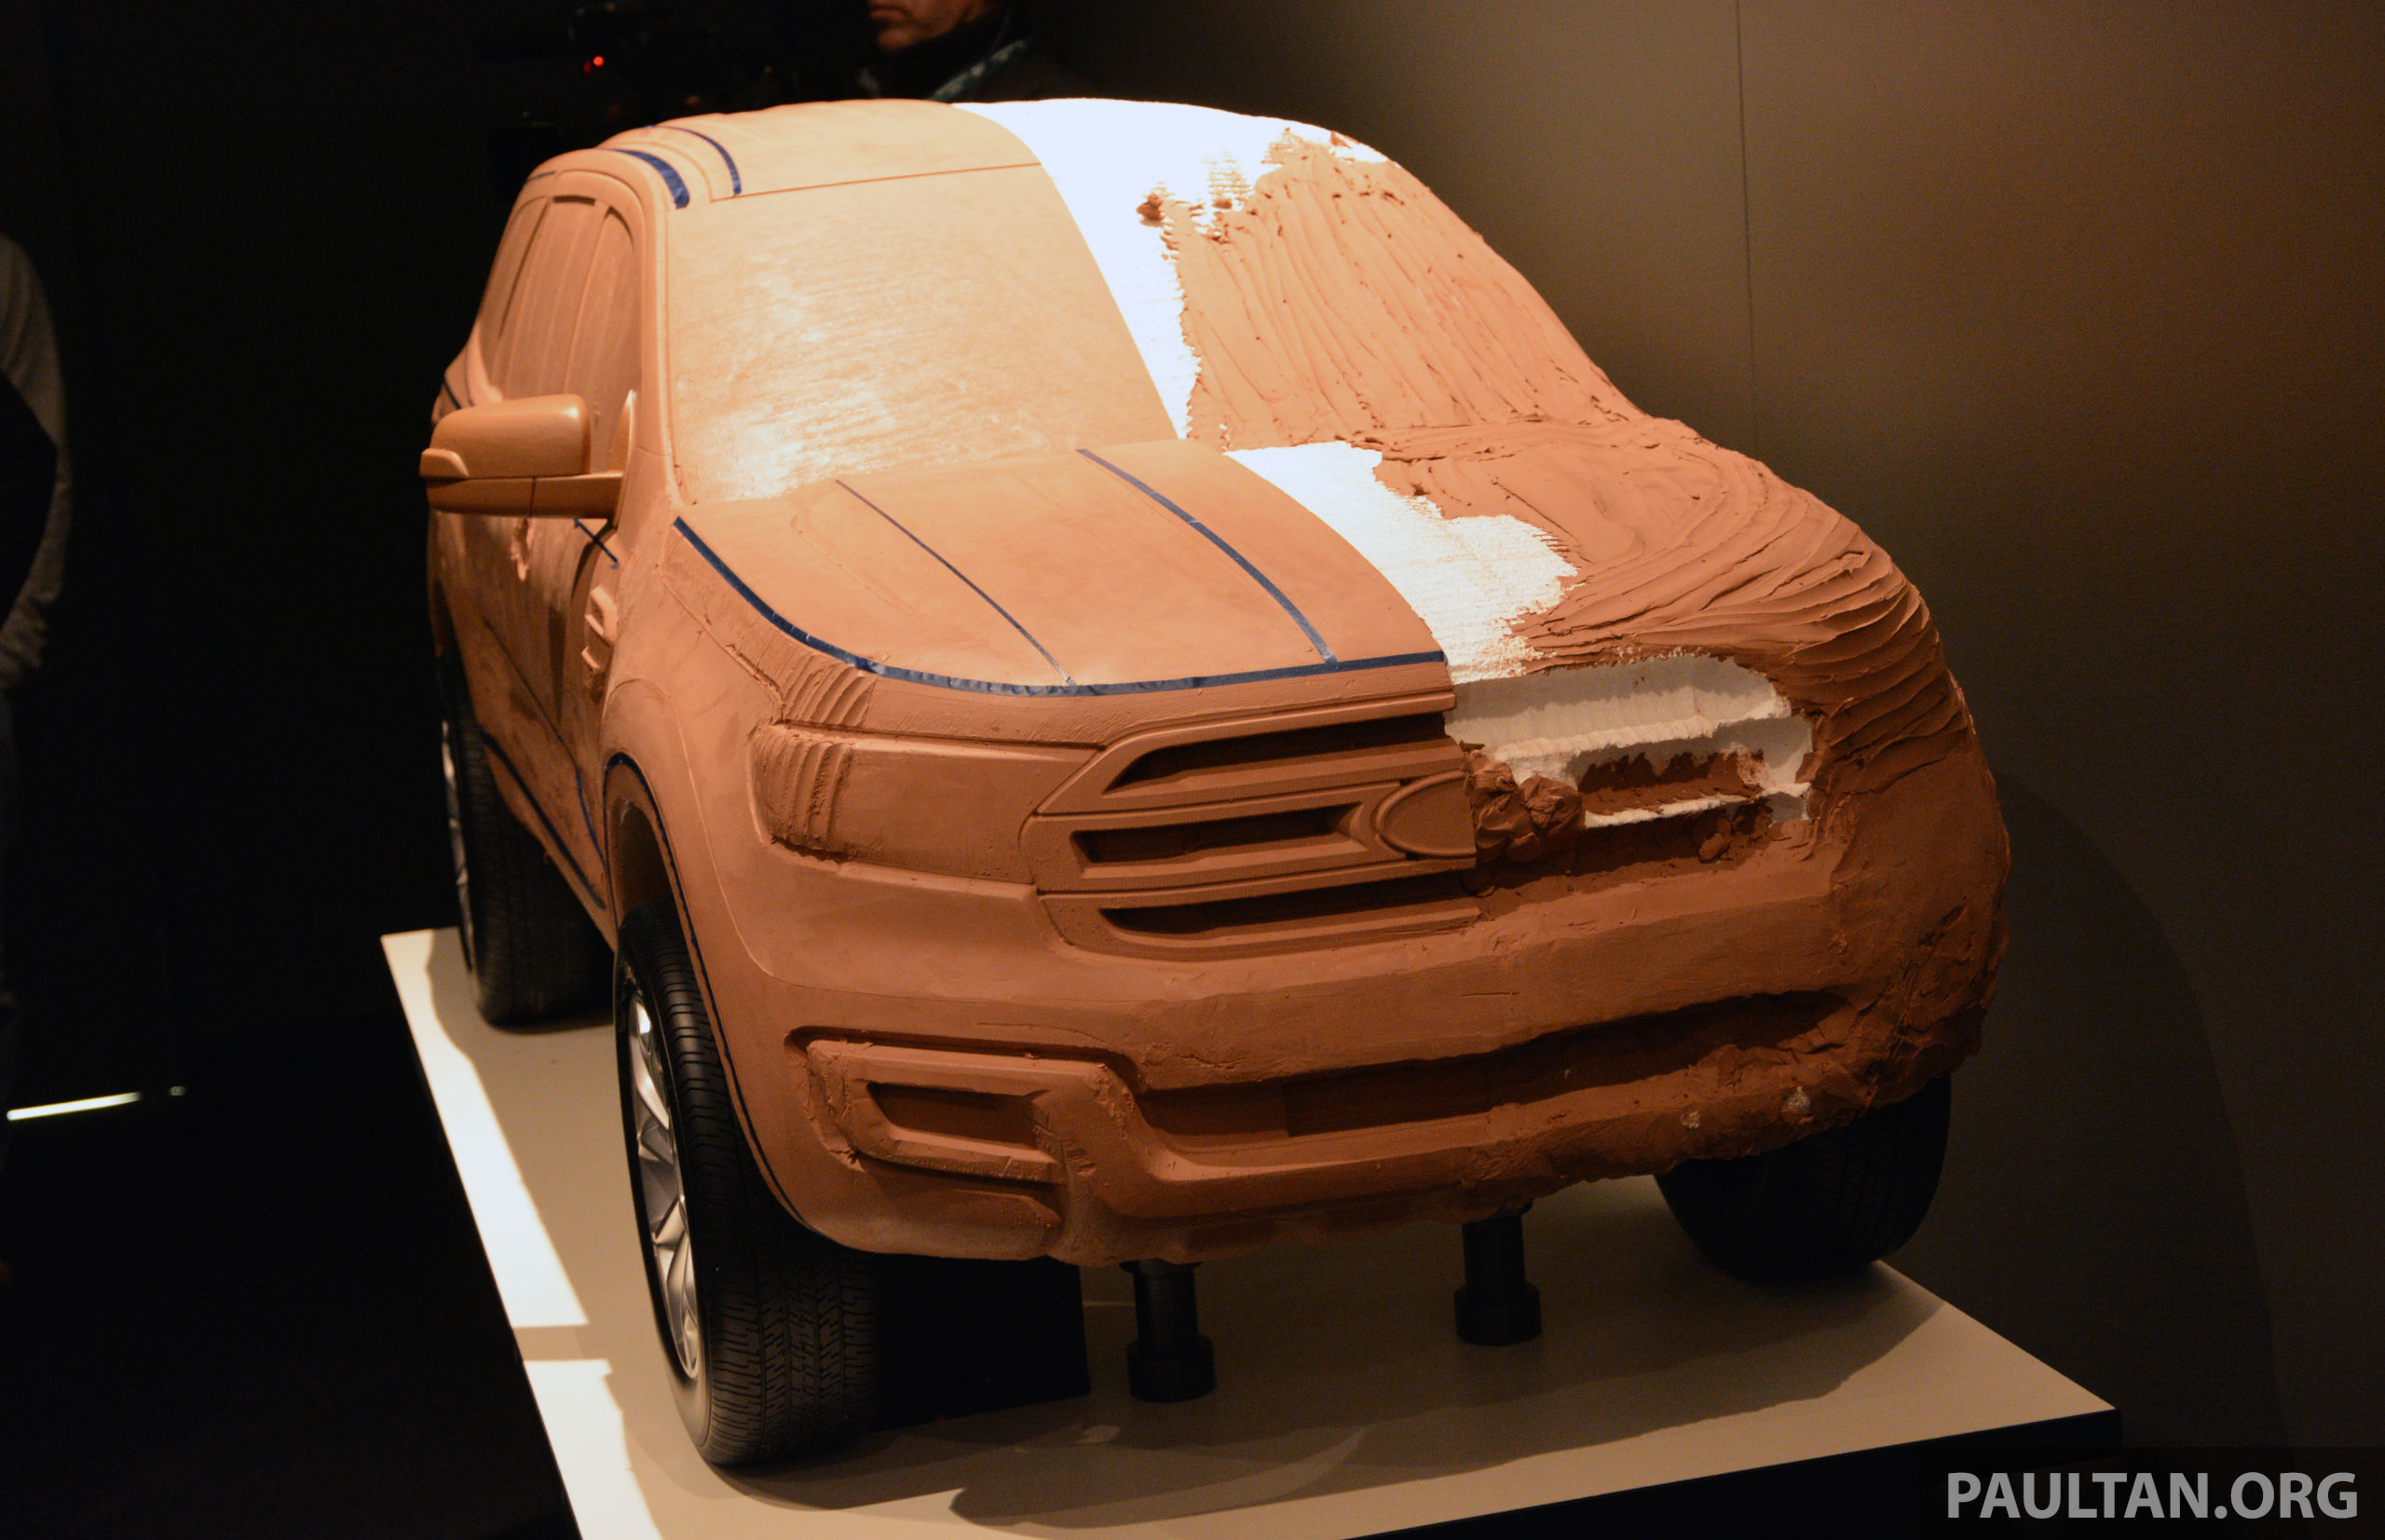 New Ford Everest to be revealed in China next week Ford-Everest-Concept ...